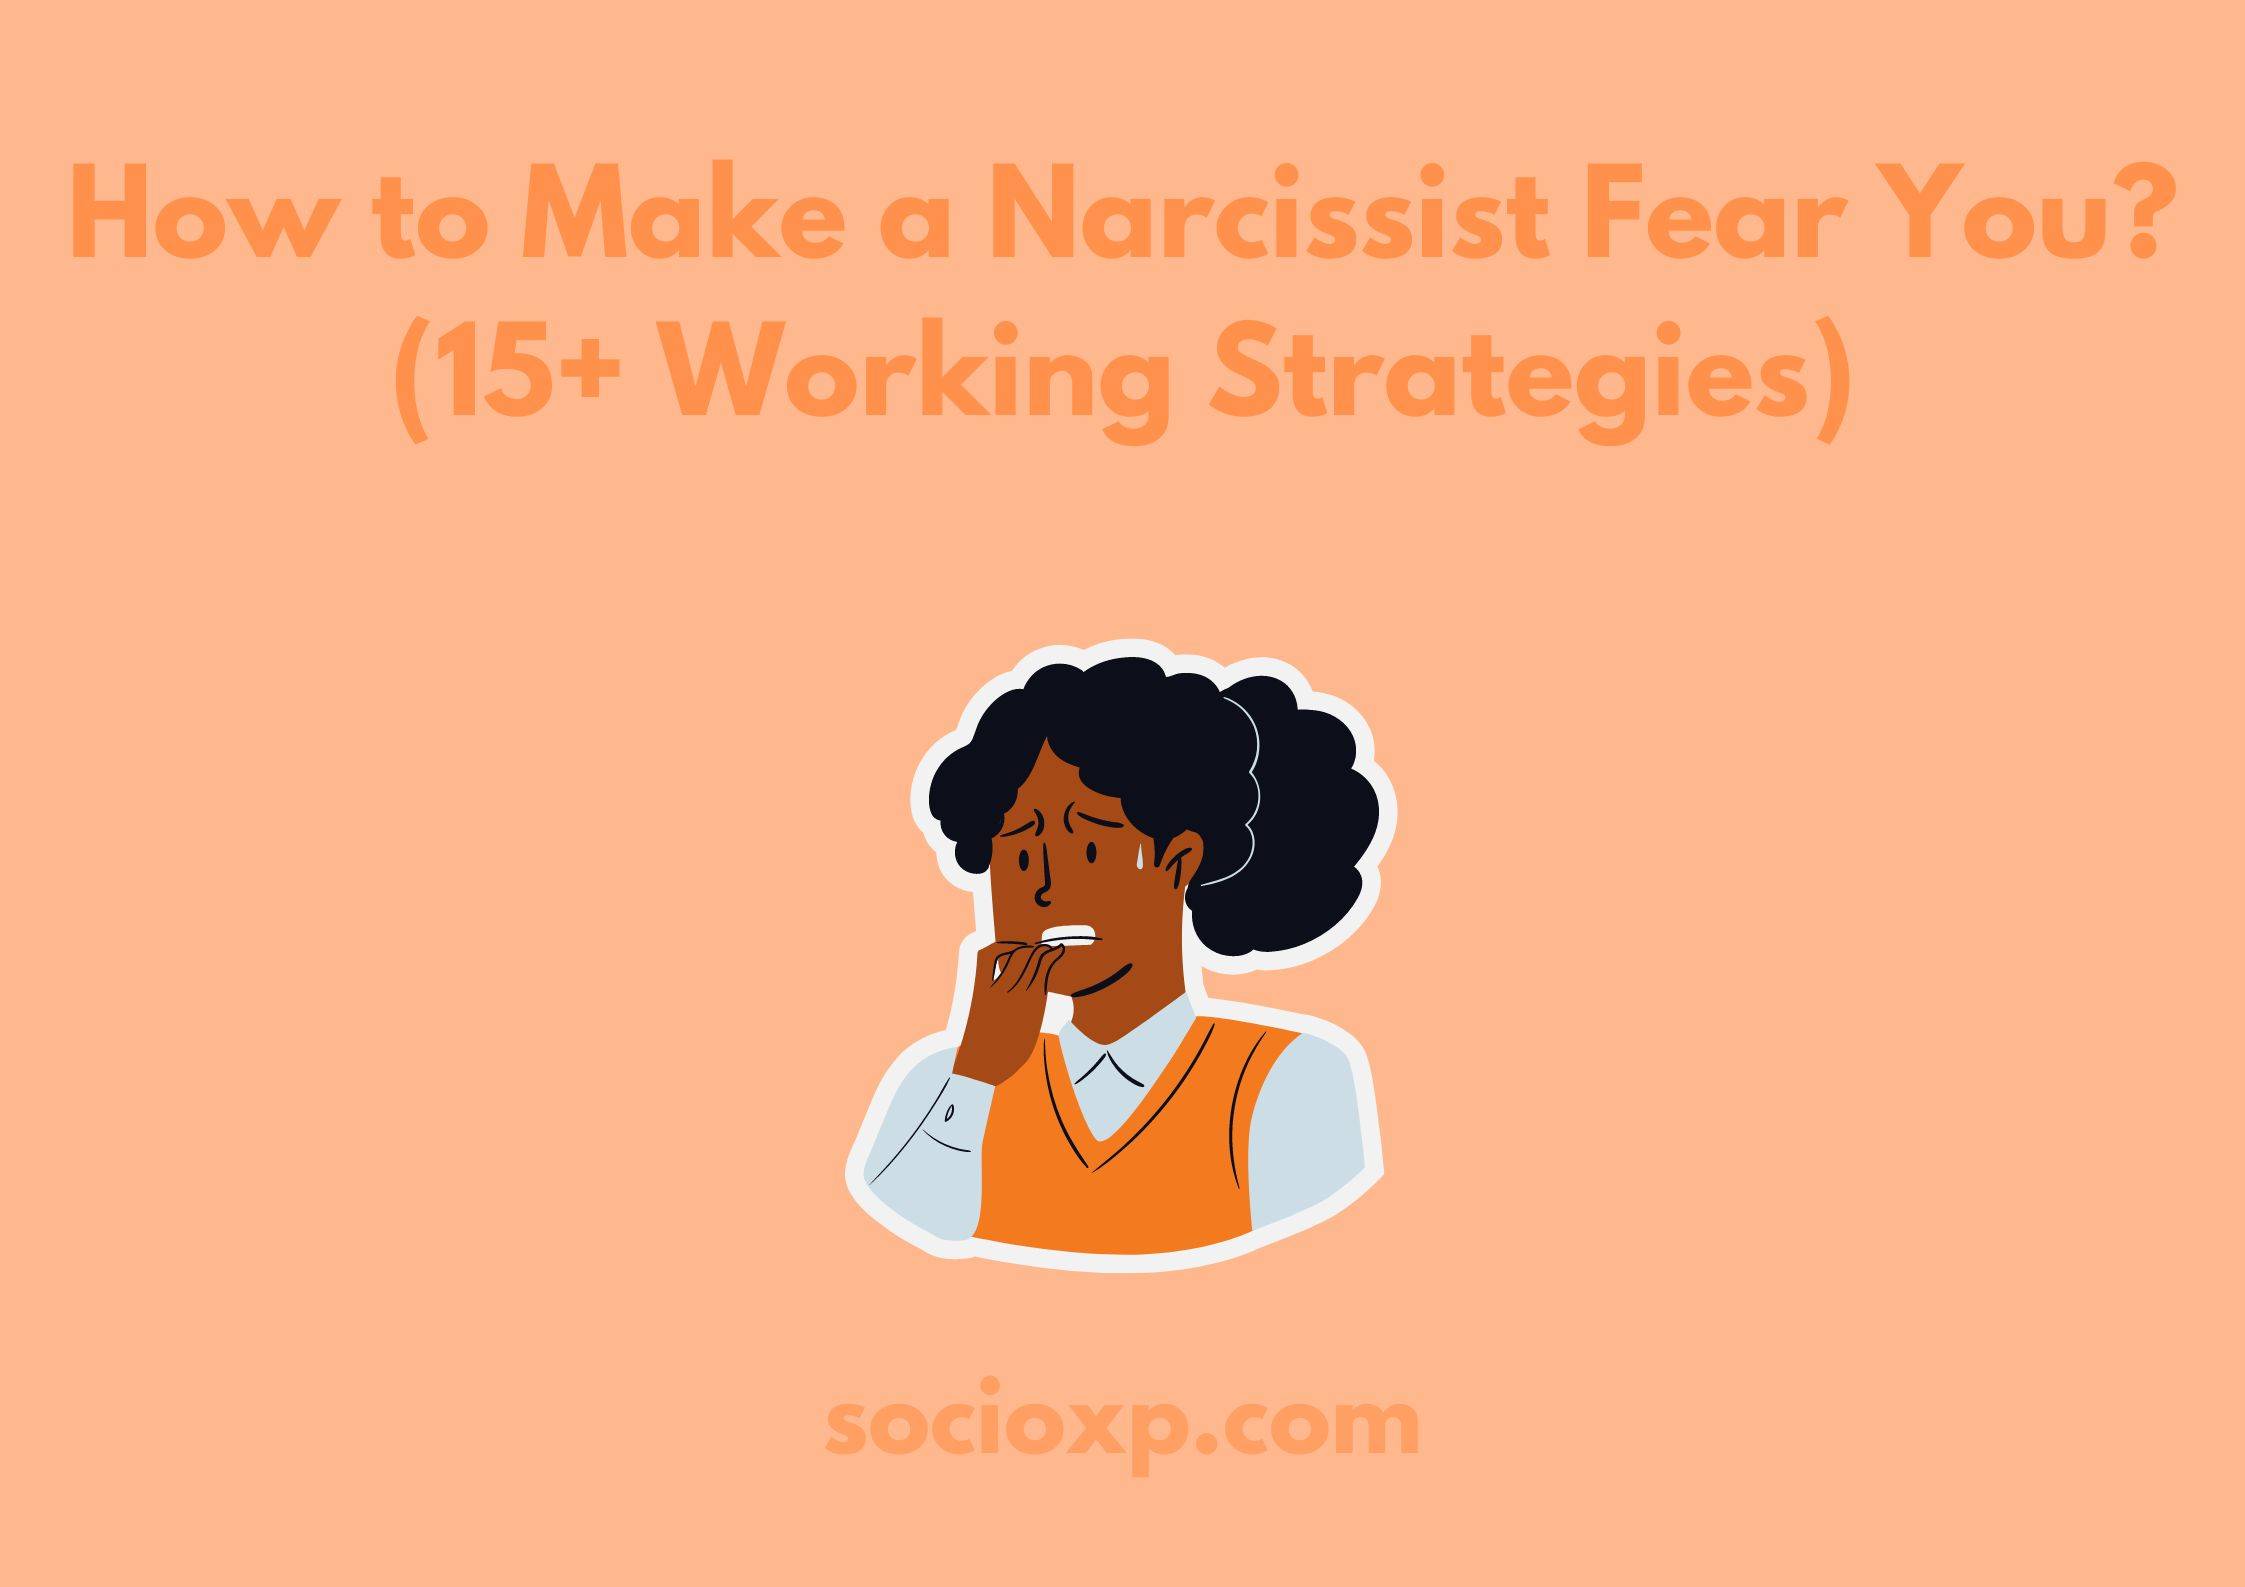 How to Make a Narcissist Fear You? (15+ Working Strategies)